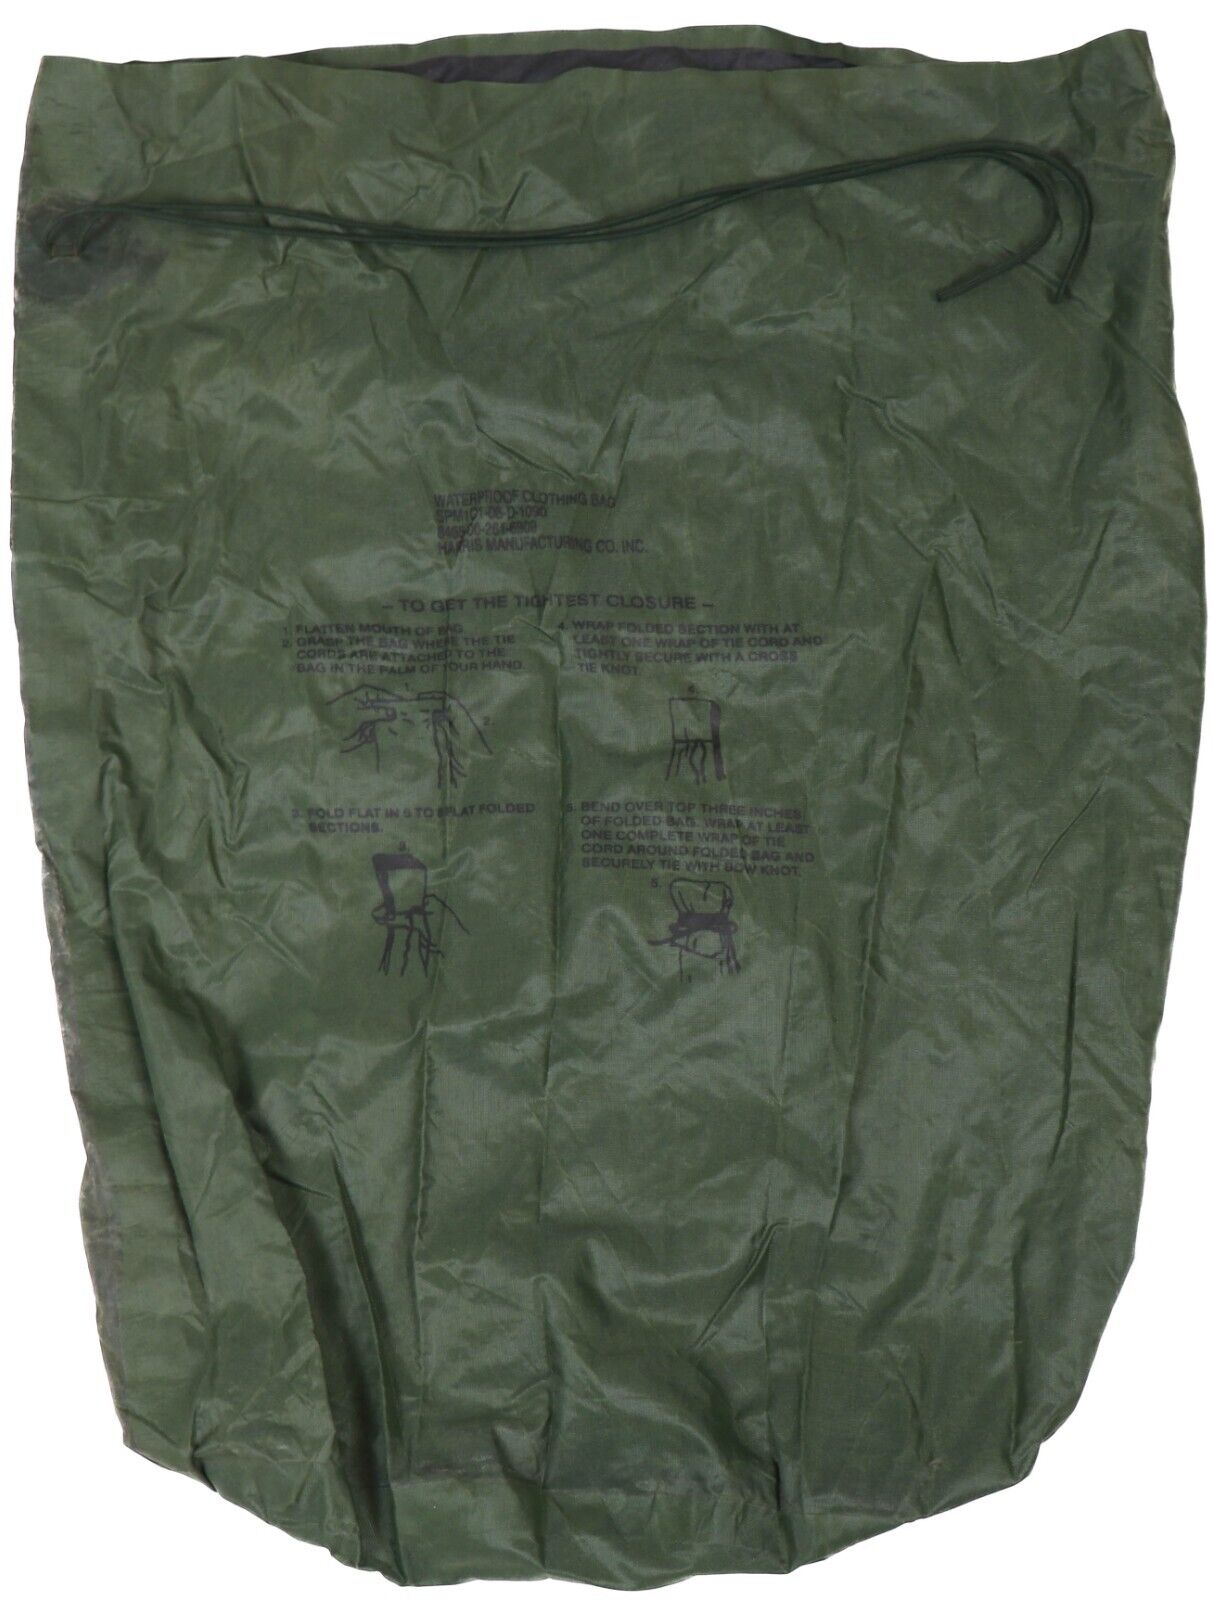 US Army Waterproof Clothing Bag Clothes Gear Wet Weather Laundry Bag Military